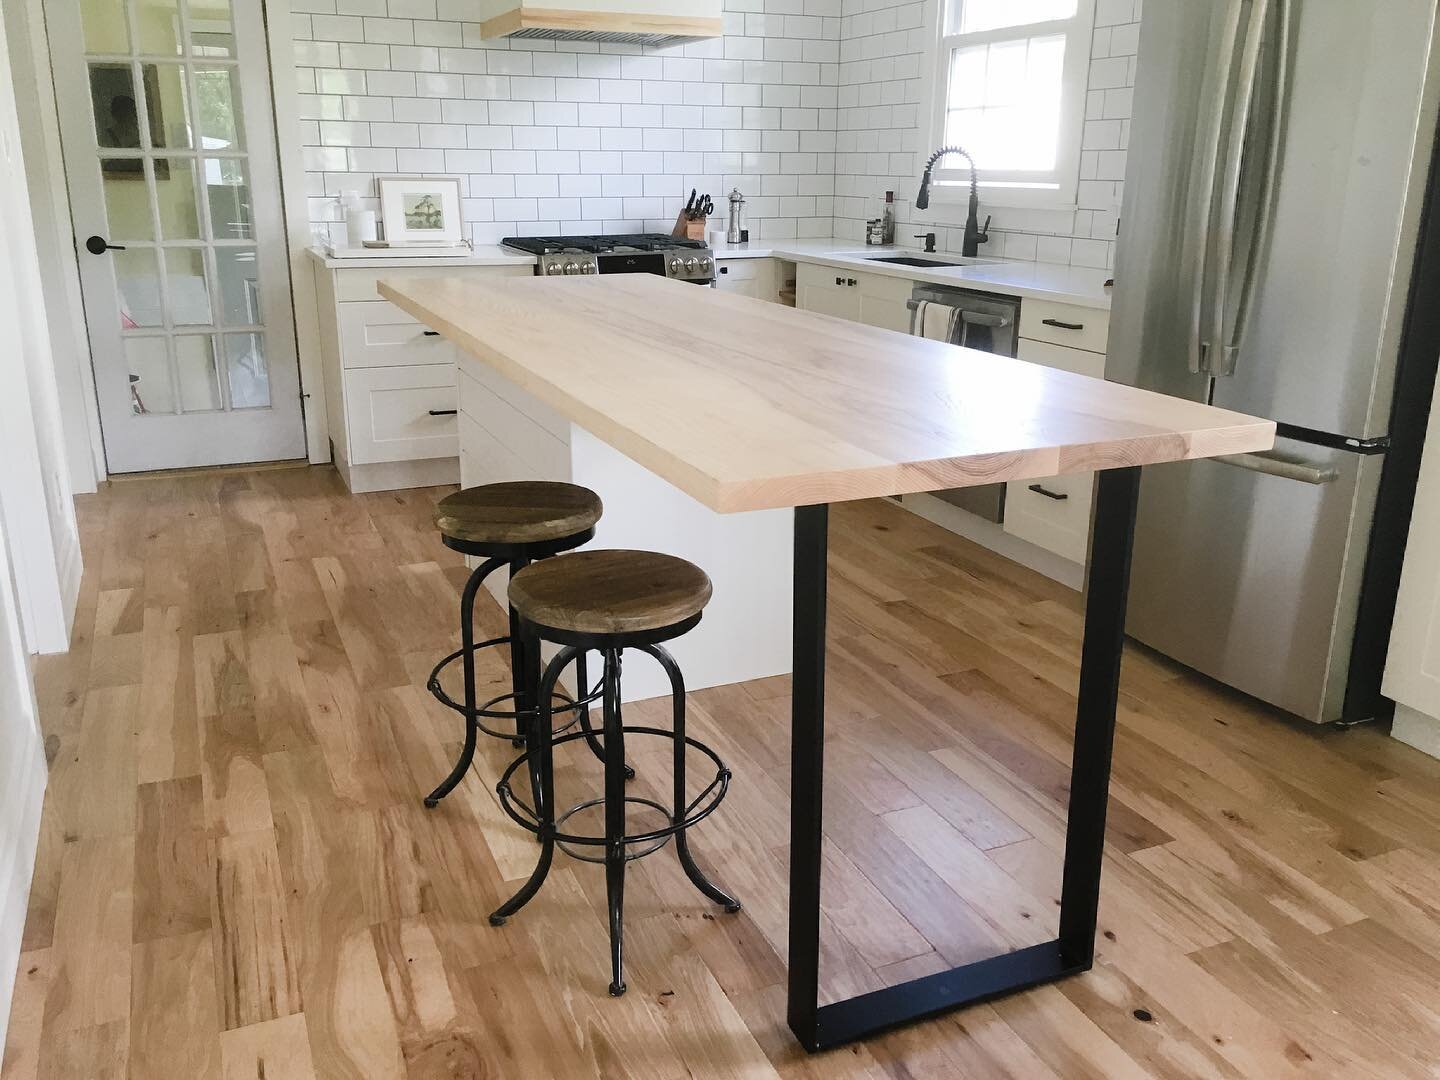 This custom ash island is one of our favourites. We love the sleek ash top with the steel base, and how it looks in this beautiful kitchen!

#customfurniture #customfurnituredesign #interiordesign #customkitchen #kitchendesign #customkitchenisland #k